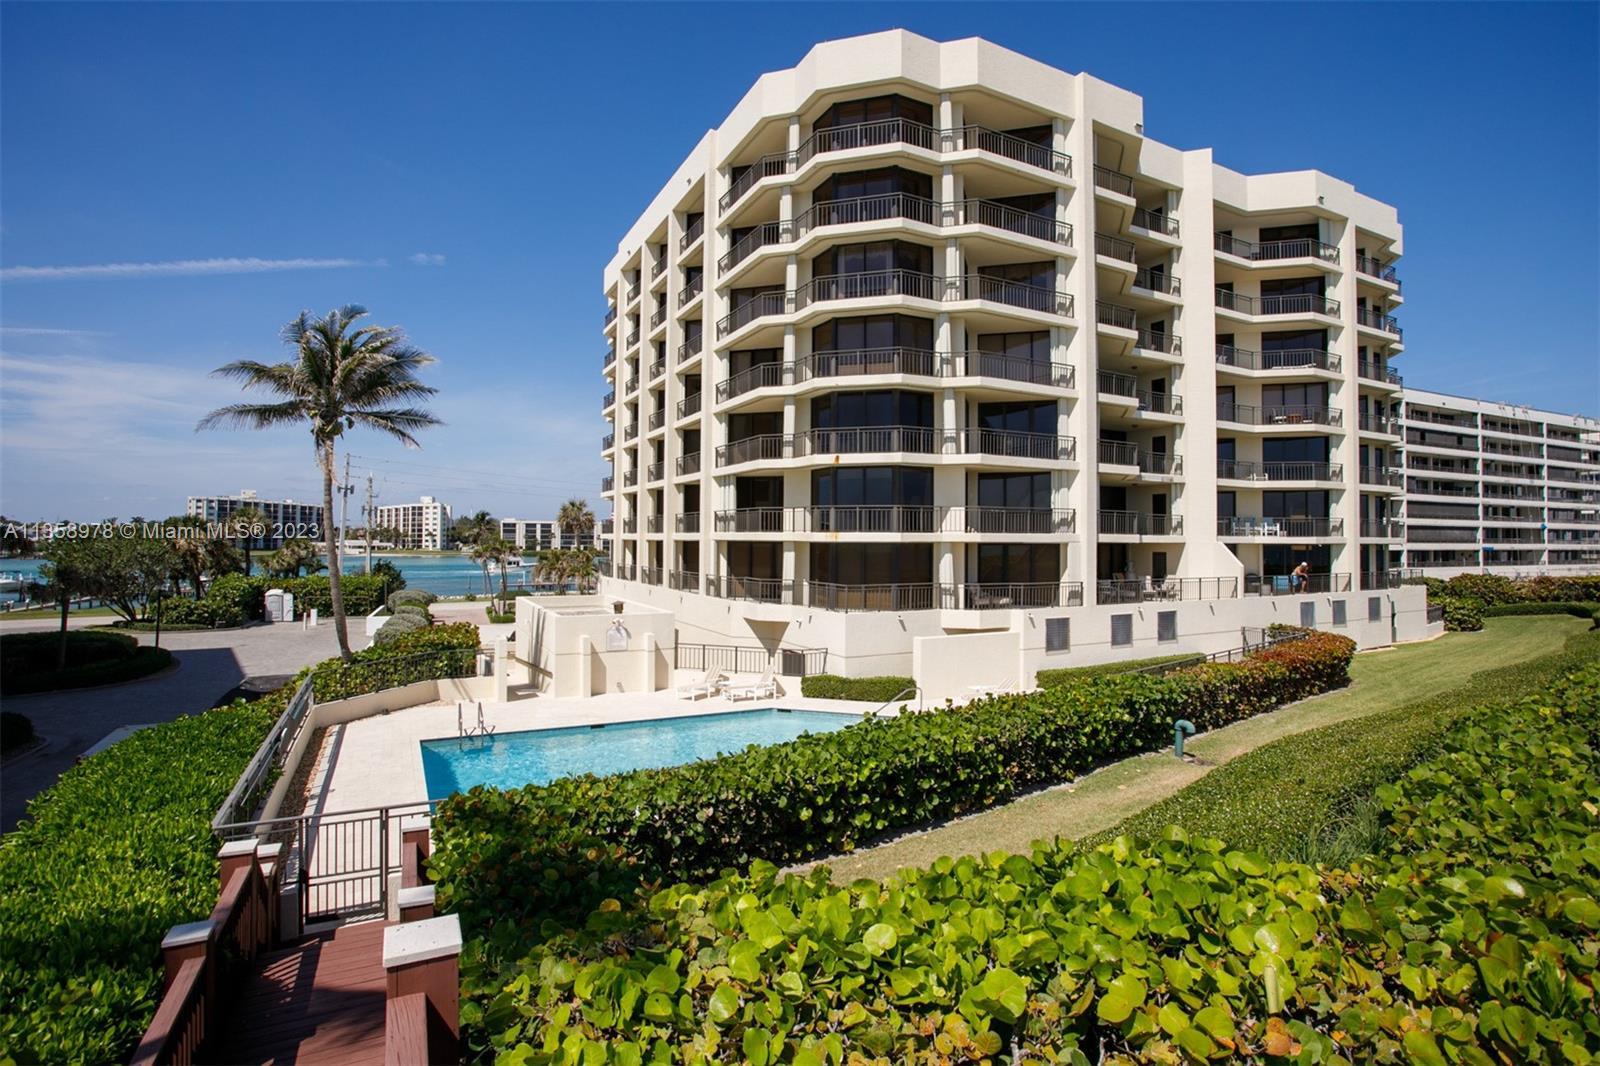 Landfall is a direct Oceanfront Jupiter Island condominium.  Escape & enjoy the seaside lifestyle in